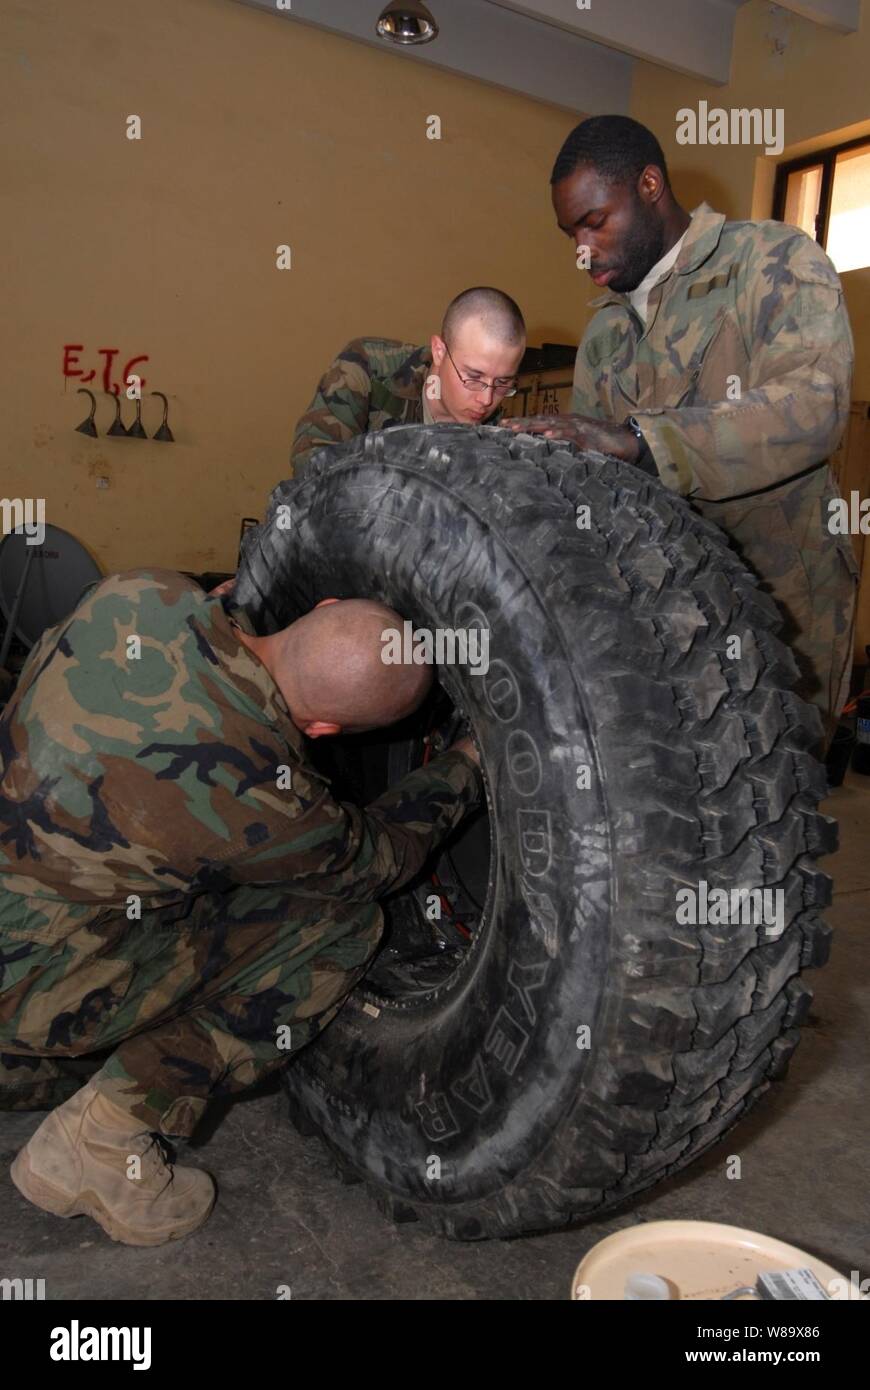 U.S. Army Sgt. Raymond Averesch (left), Pfc. Curtis Lacher (center) and Spc. Cedrick Griffin, with the Military Transition and Training Team, assemble a wheel for a mine-resistant, ambush-protected vehicle in Kadhimiya, Iraq, on Feb. 23, 2009. Stock Photo